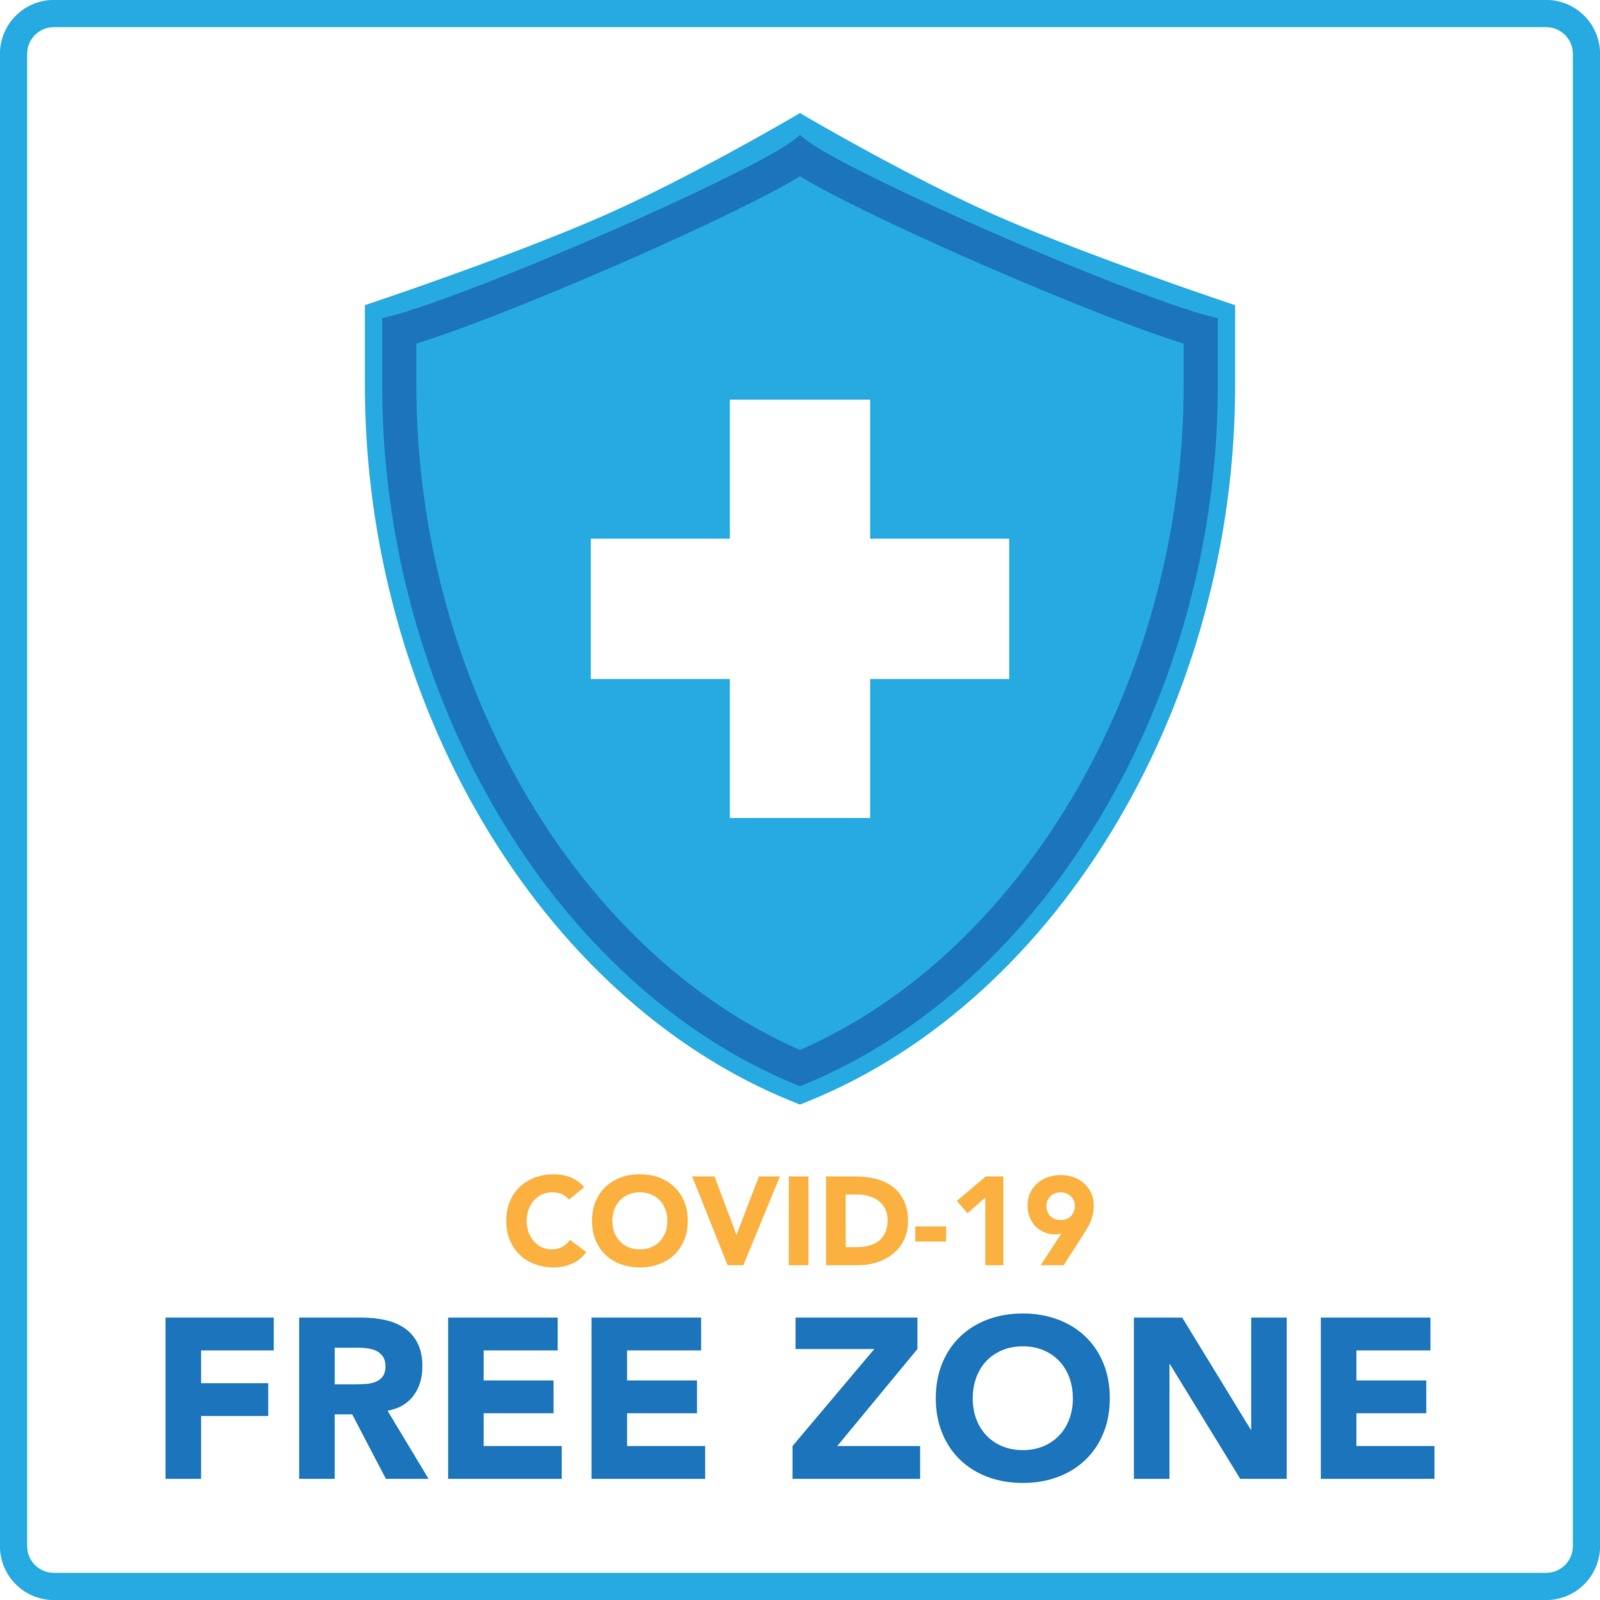 Covid free zone sign symbol. by kanate